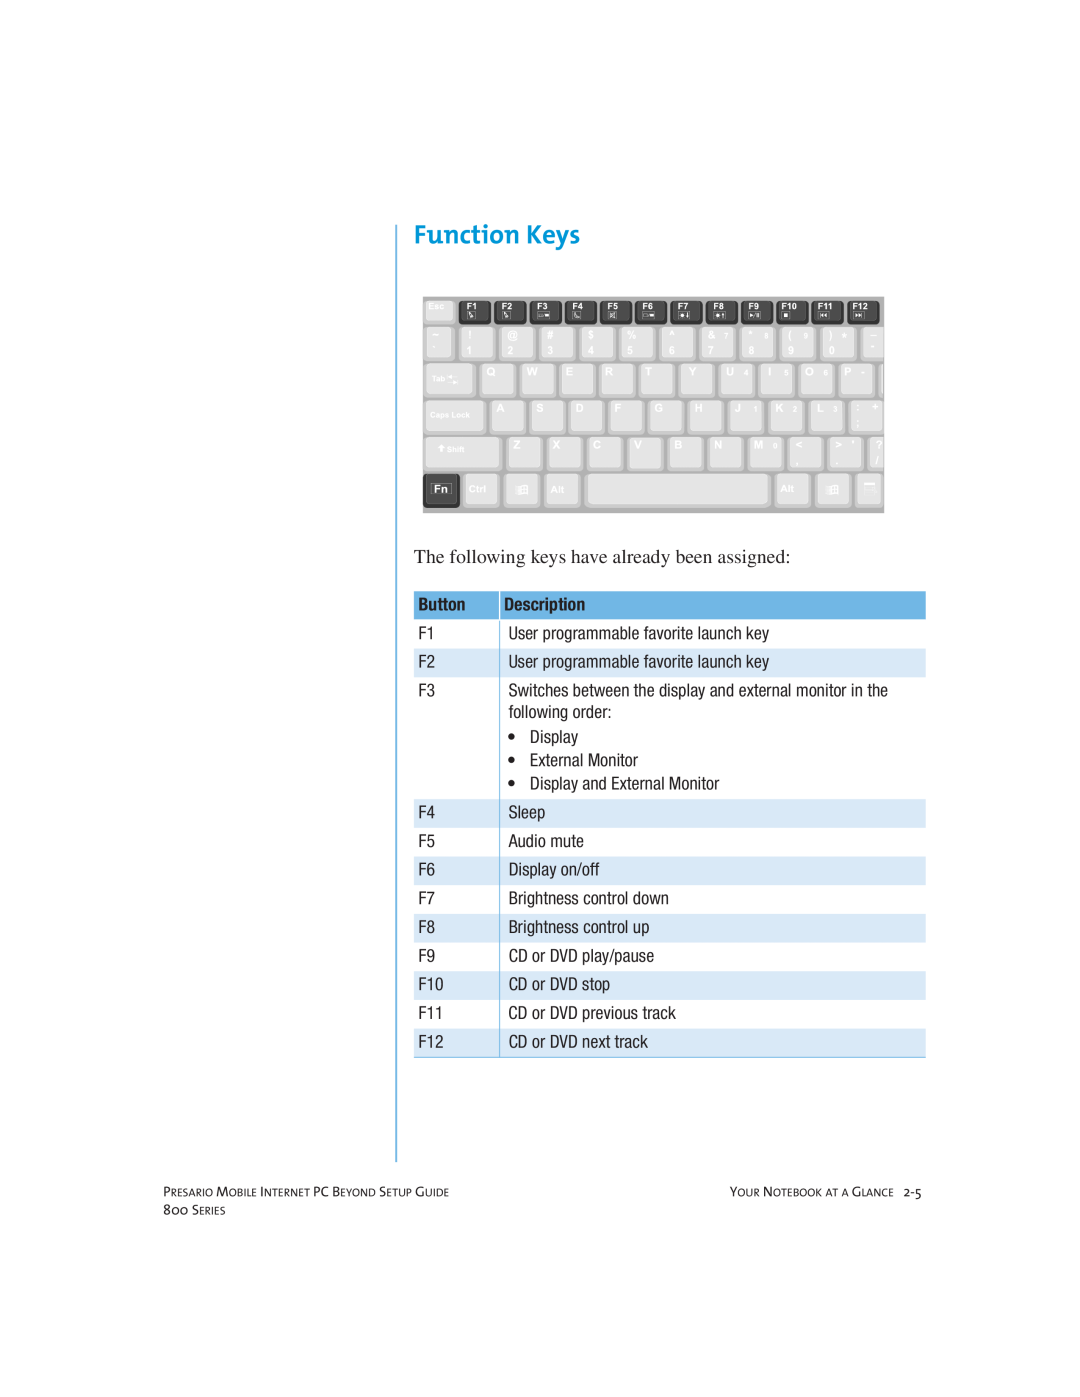 Compaq 800 manual Function Keys, The following keys have already been assigned 